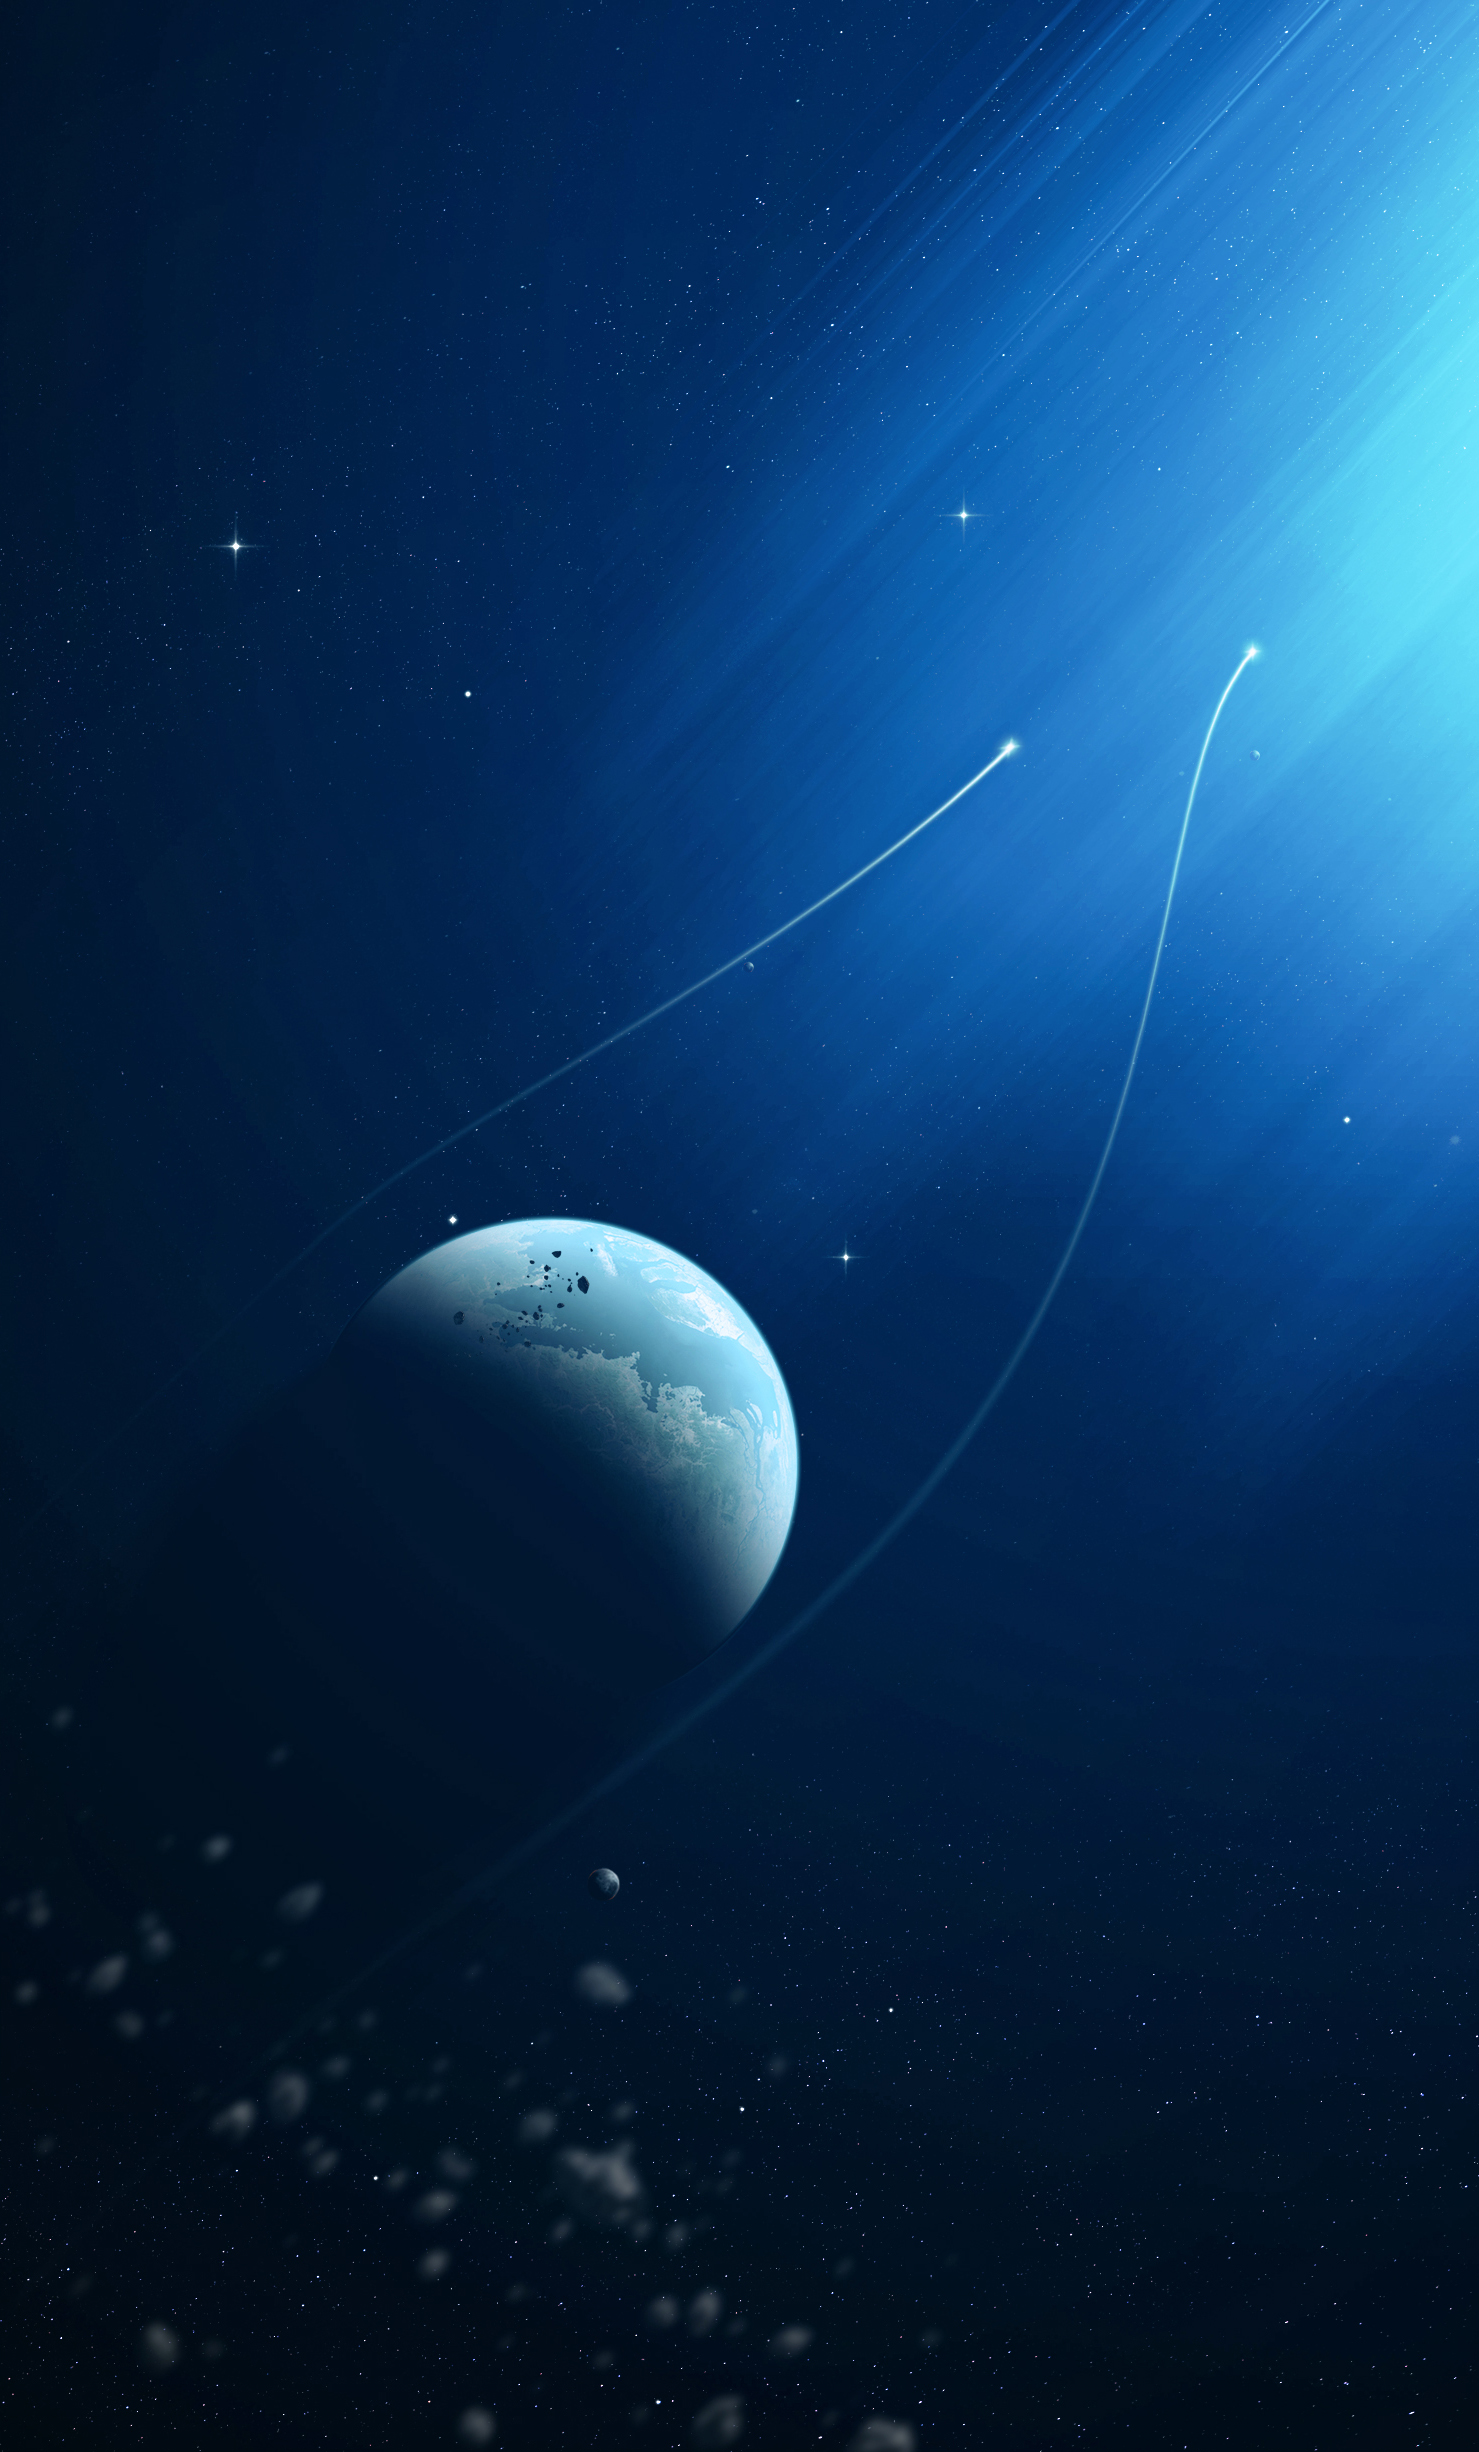 Cool Wallpapers light, planet, stars, universe, shine, asteroids